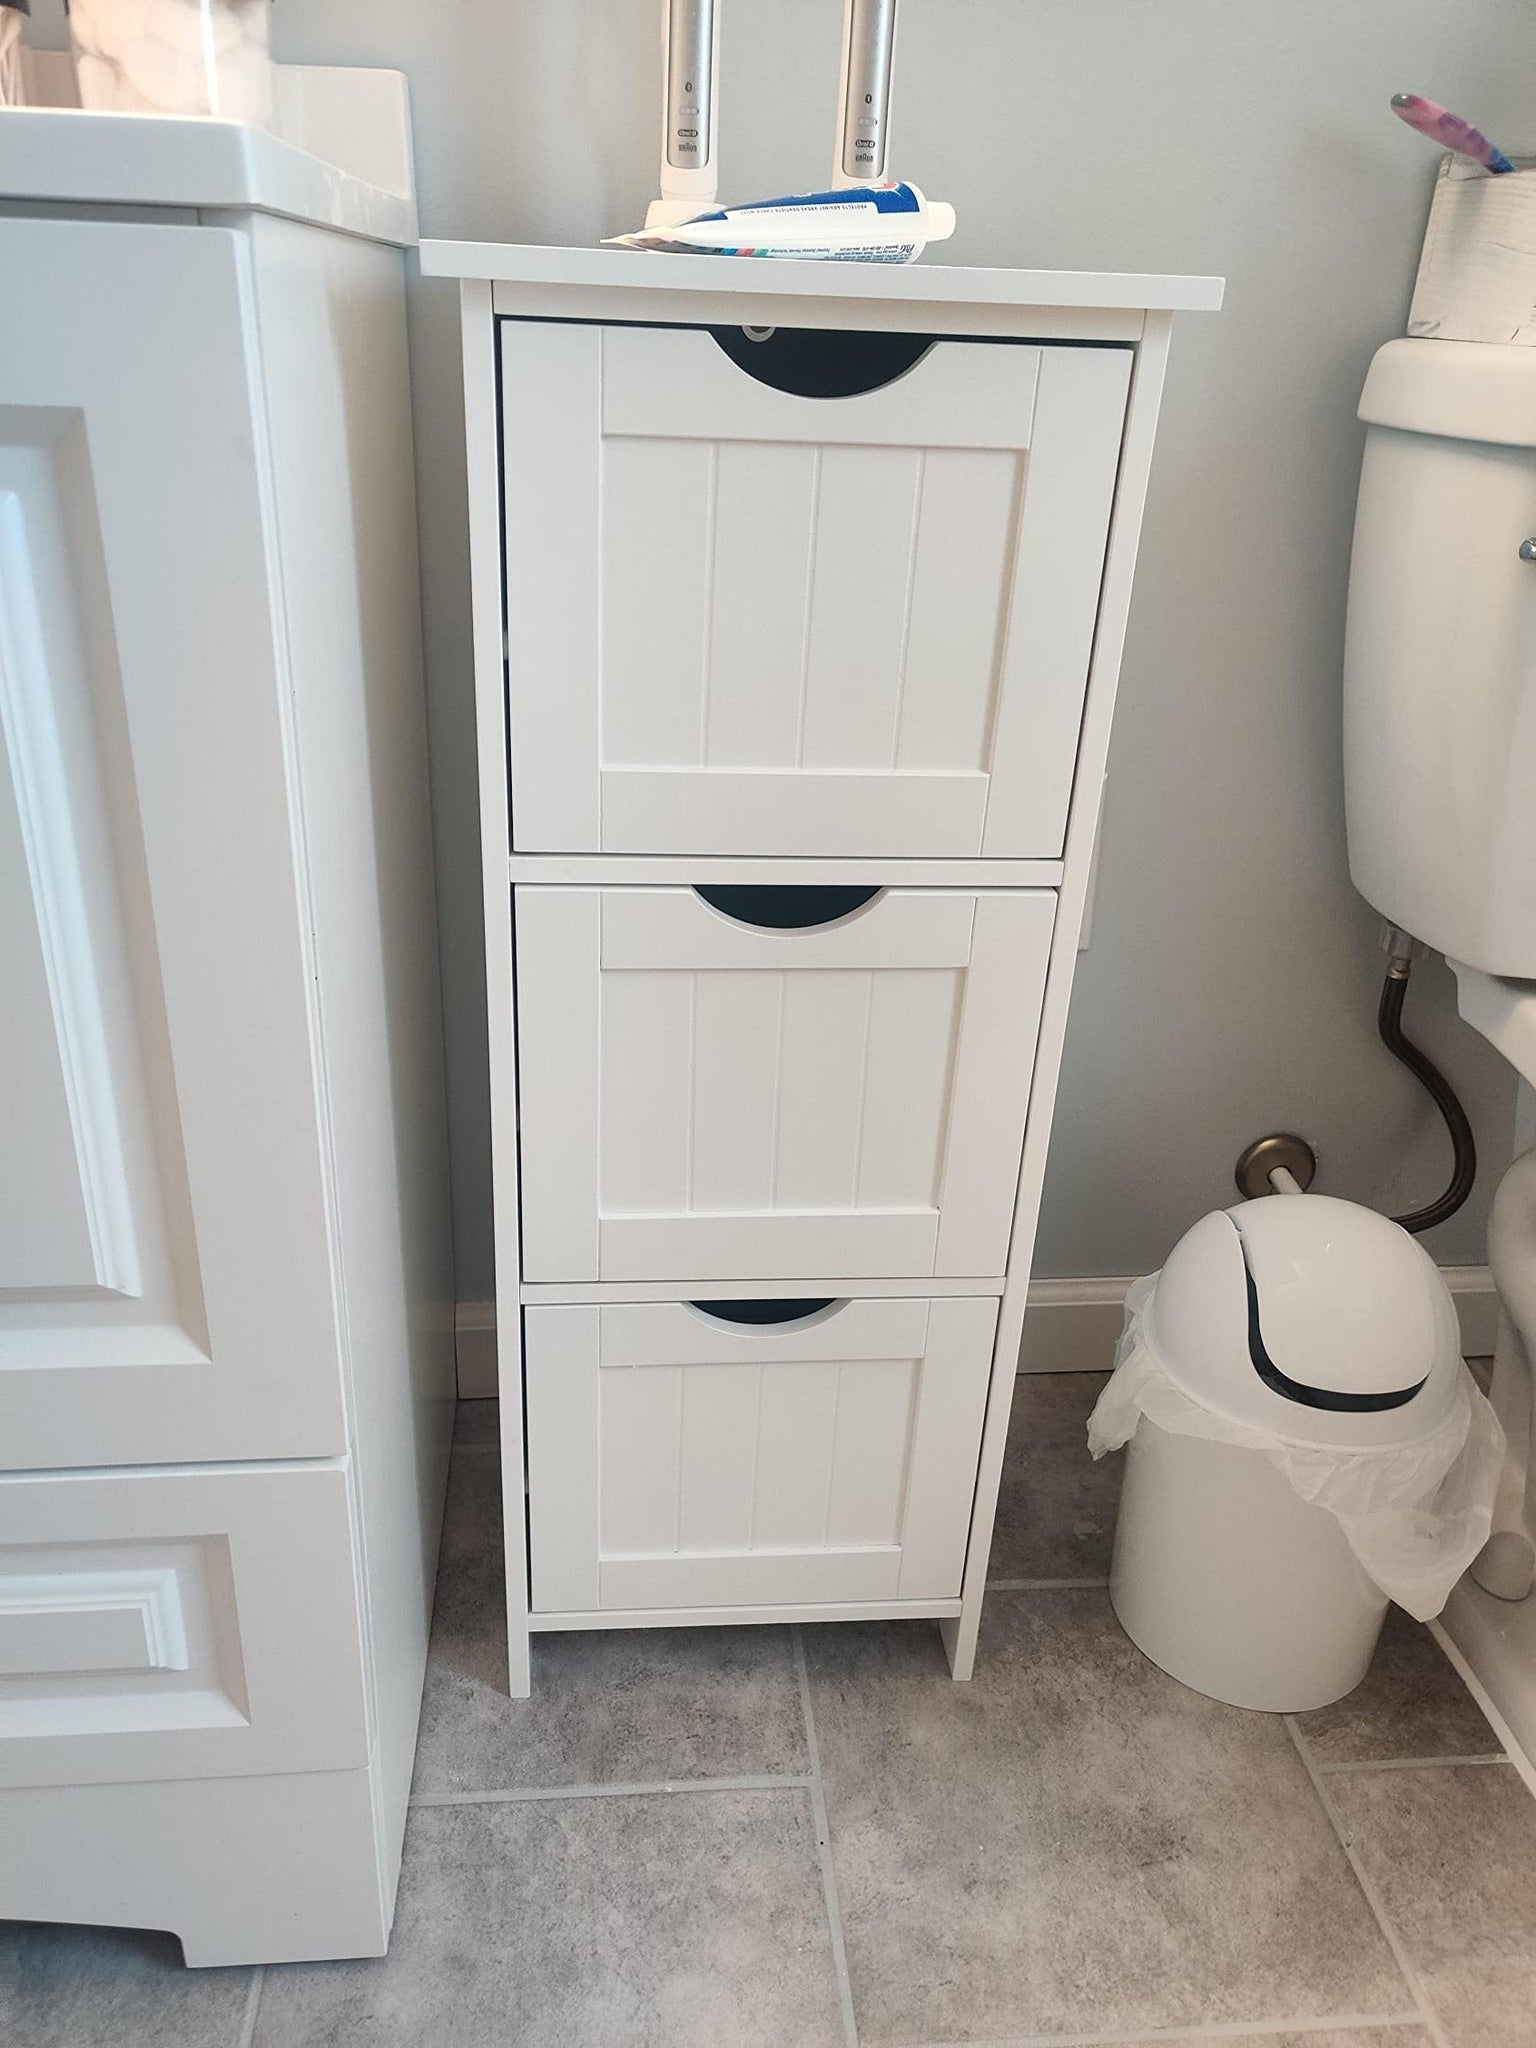 Bathroom Cabinet Floor Cabinet, Free-Standing Storage Cabinet with 3 Drawers, 12.6 x 11.8 x 31.9 Inches - HWLEXTRA 